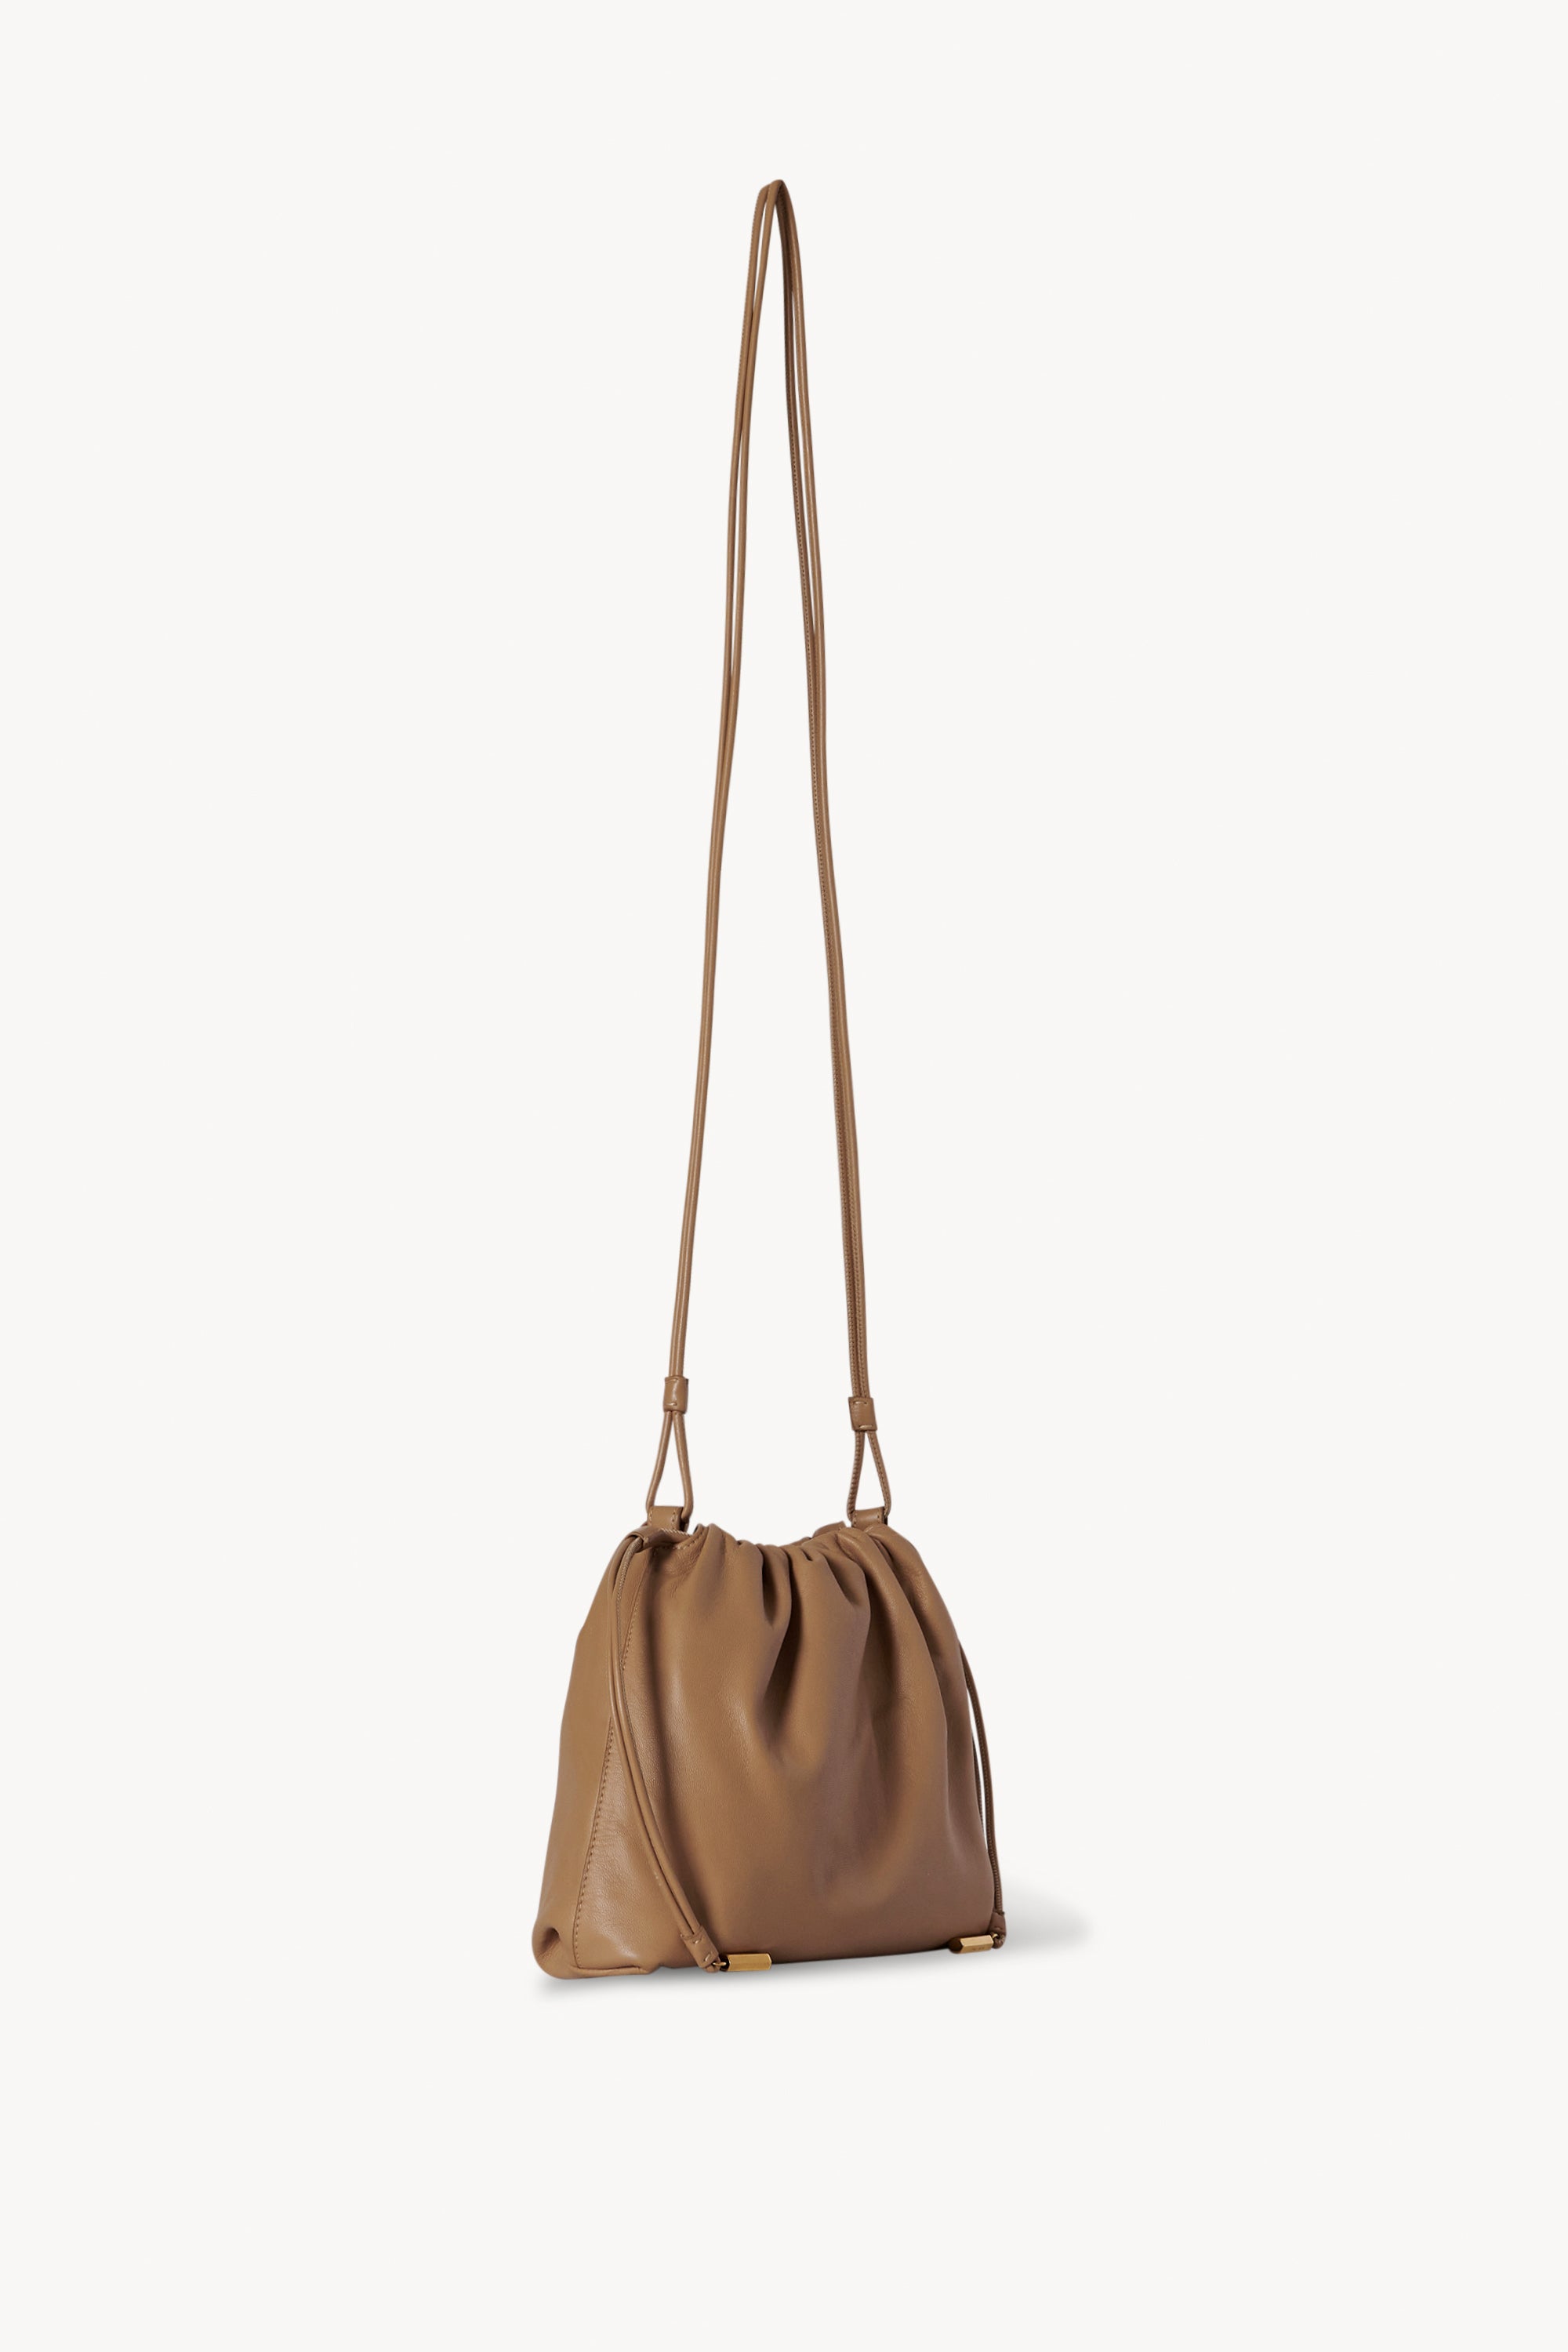 Angy Bag Tan In Leather The Row 4917